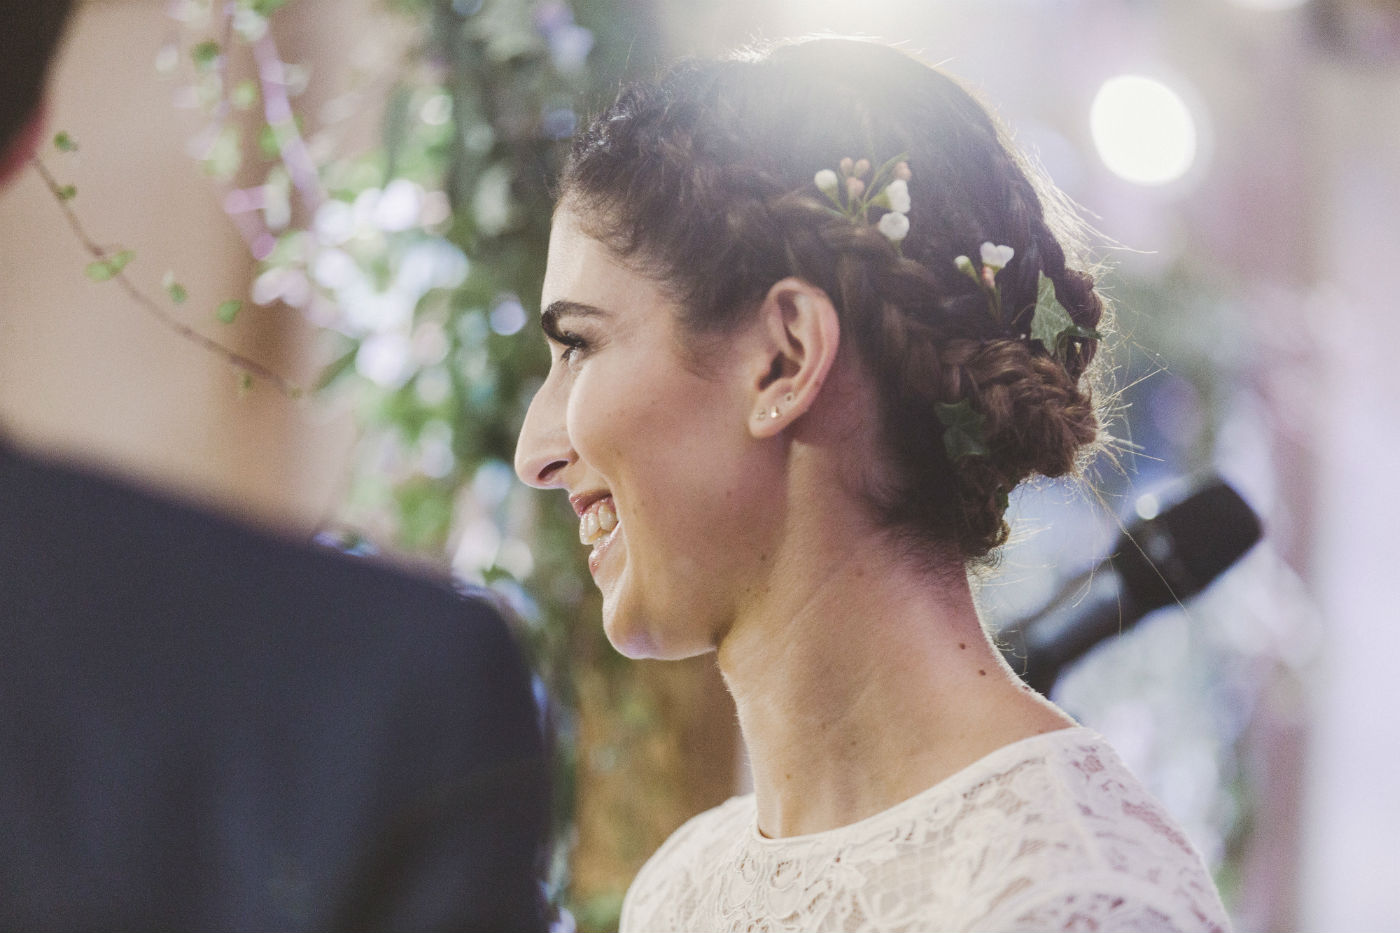 View More: http://razialife.pass.us/lily-and-richs-wedding